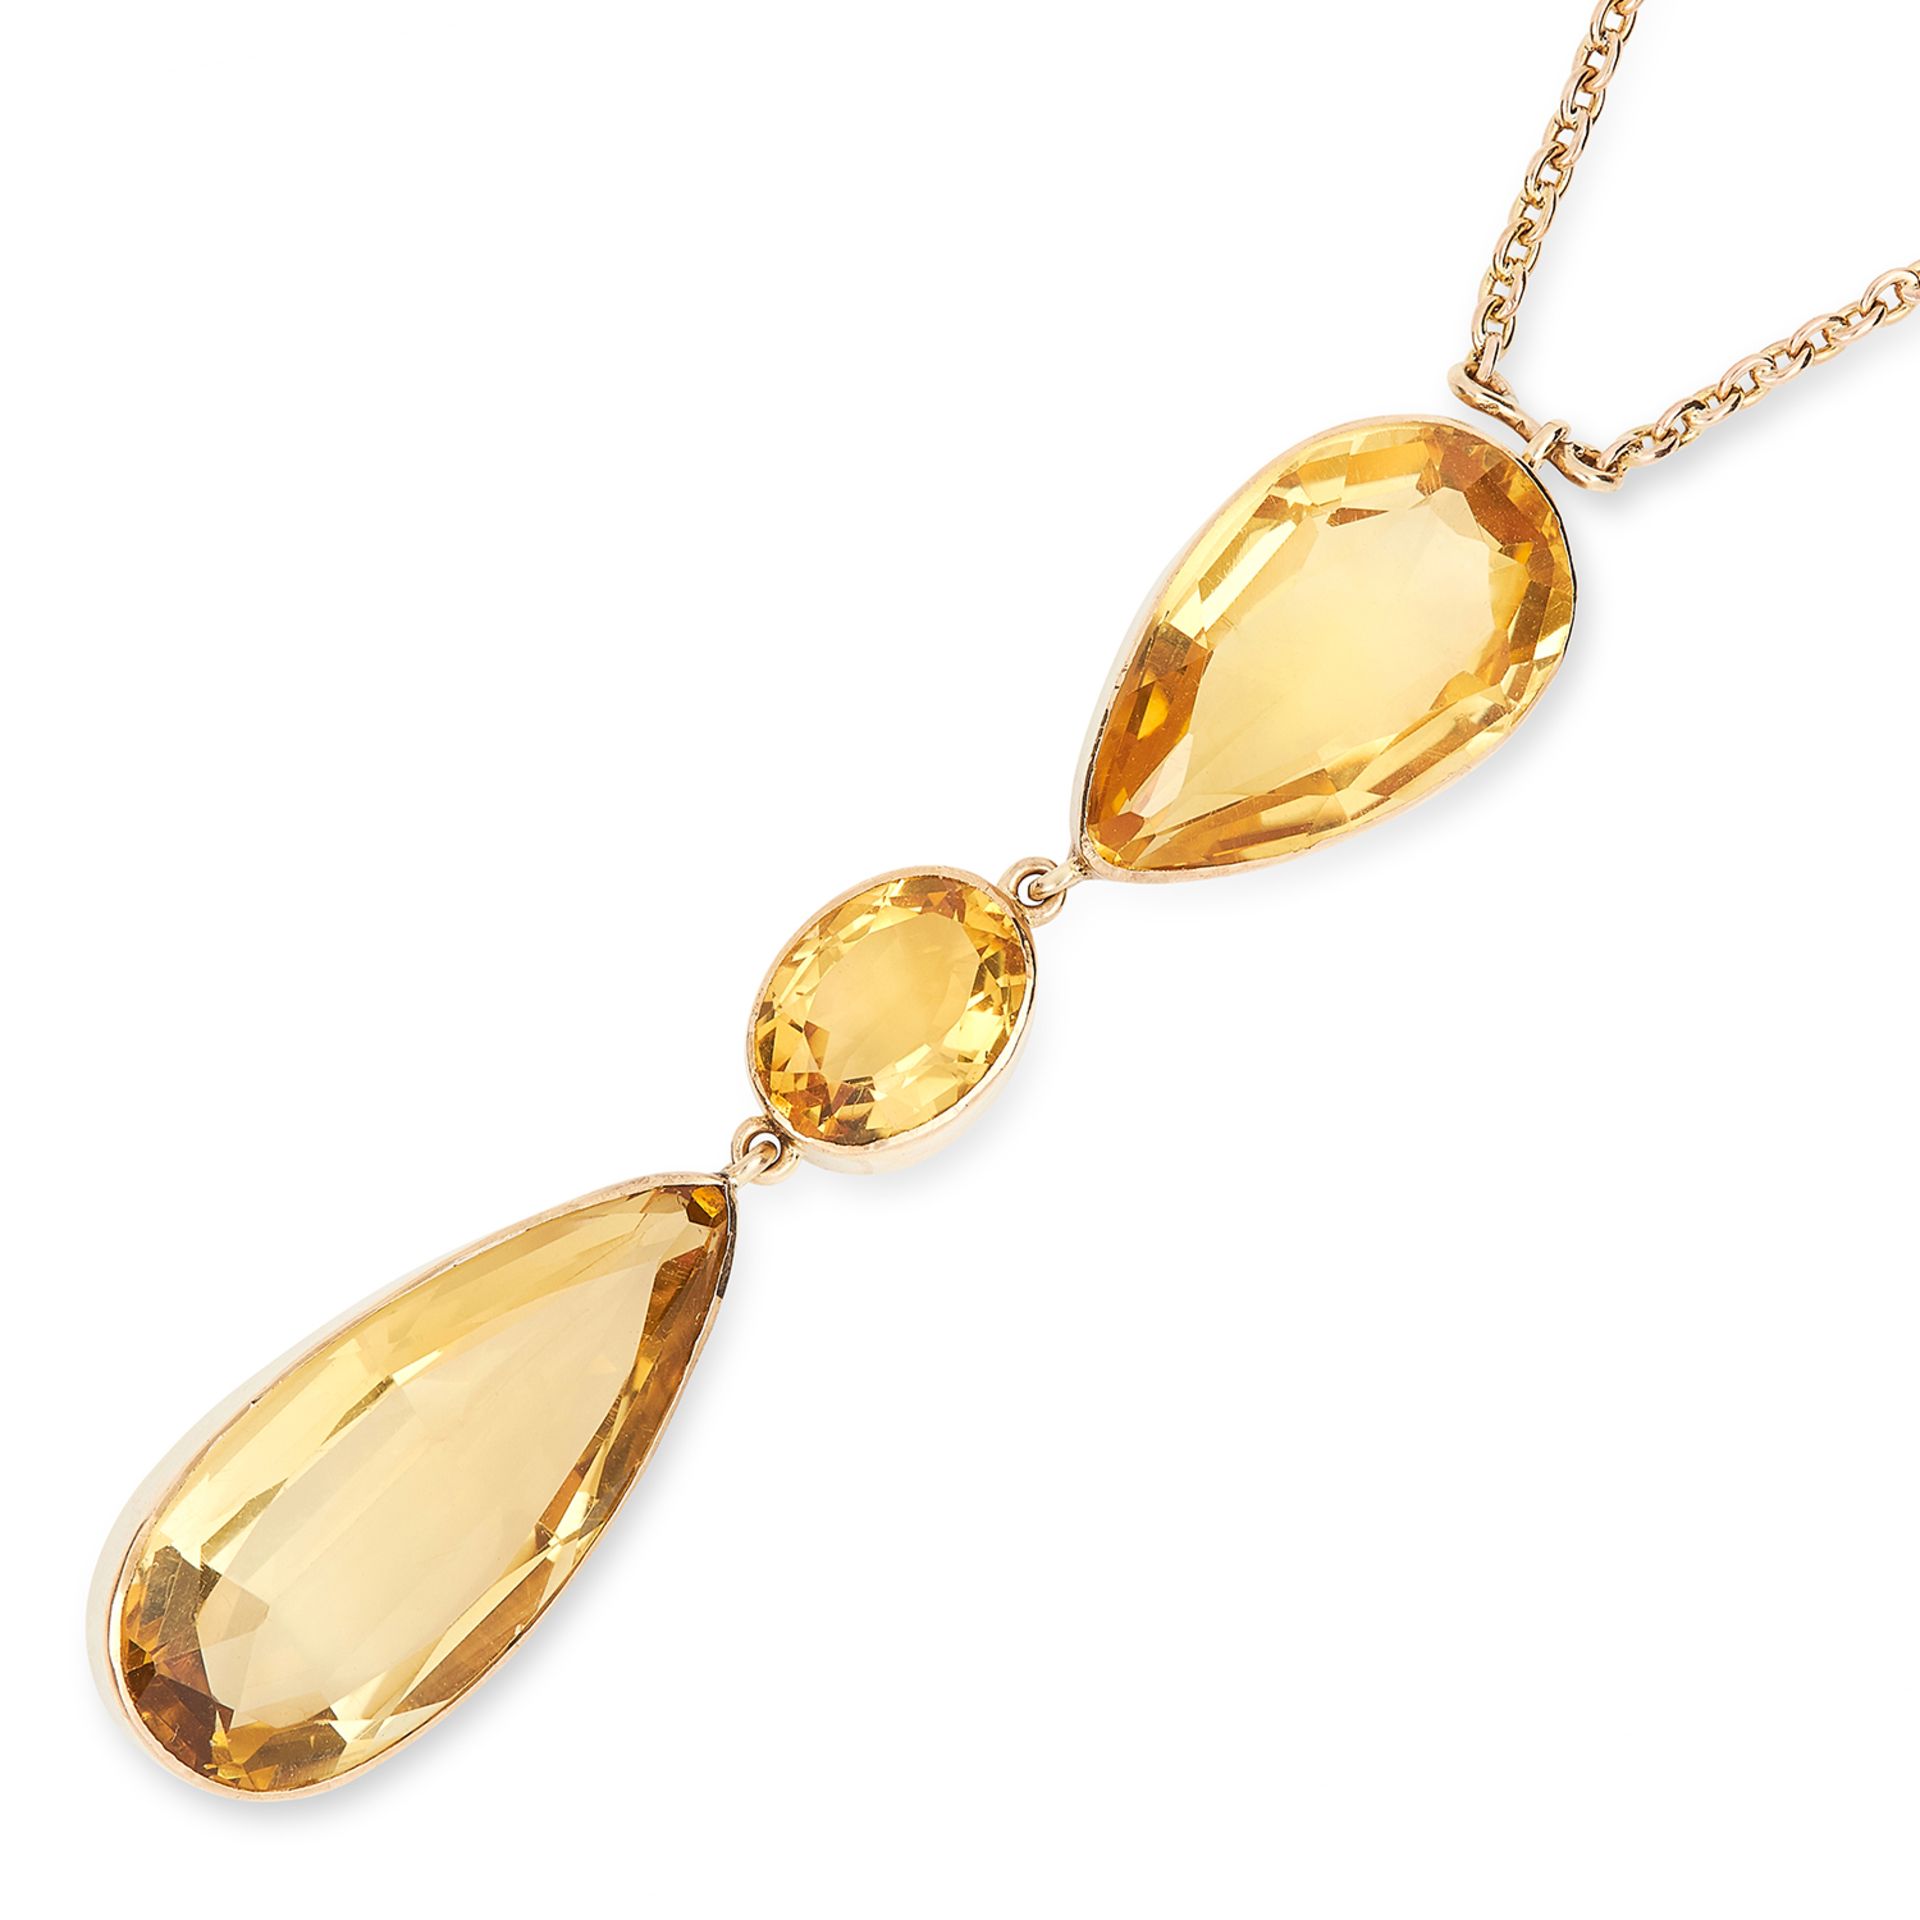 ANTIQUE CITRINE PENDANT NECKLACE set with pear and oval cut citrines in a drop, with an oval cut